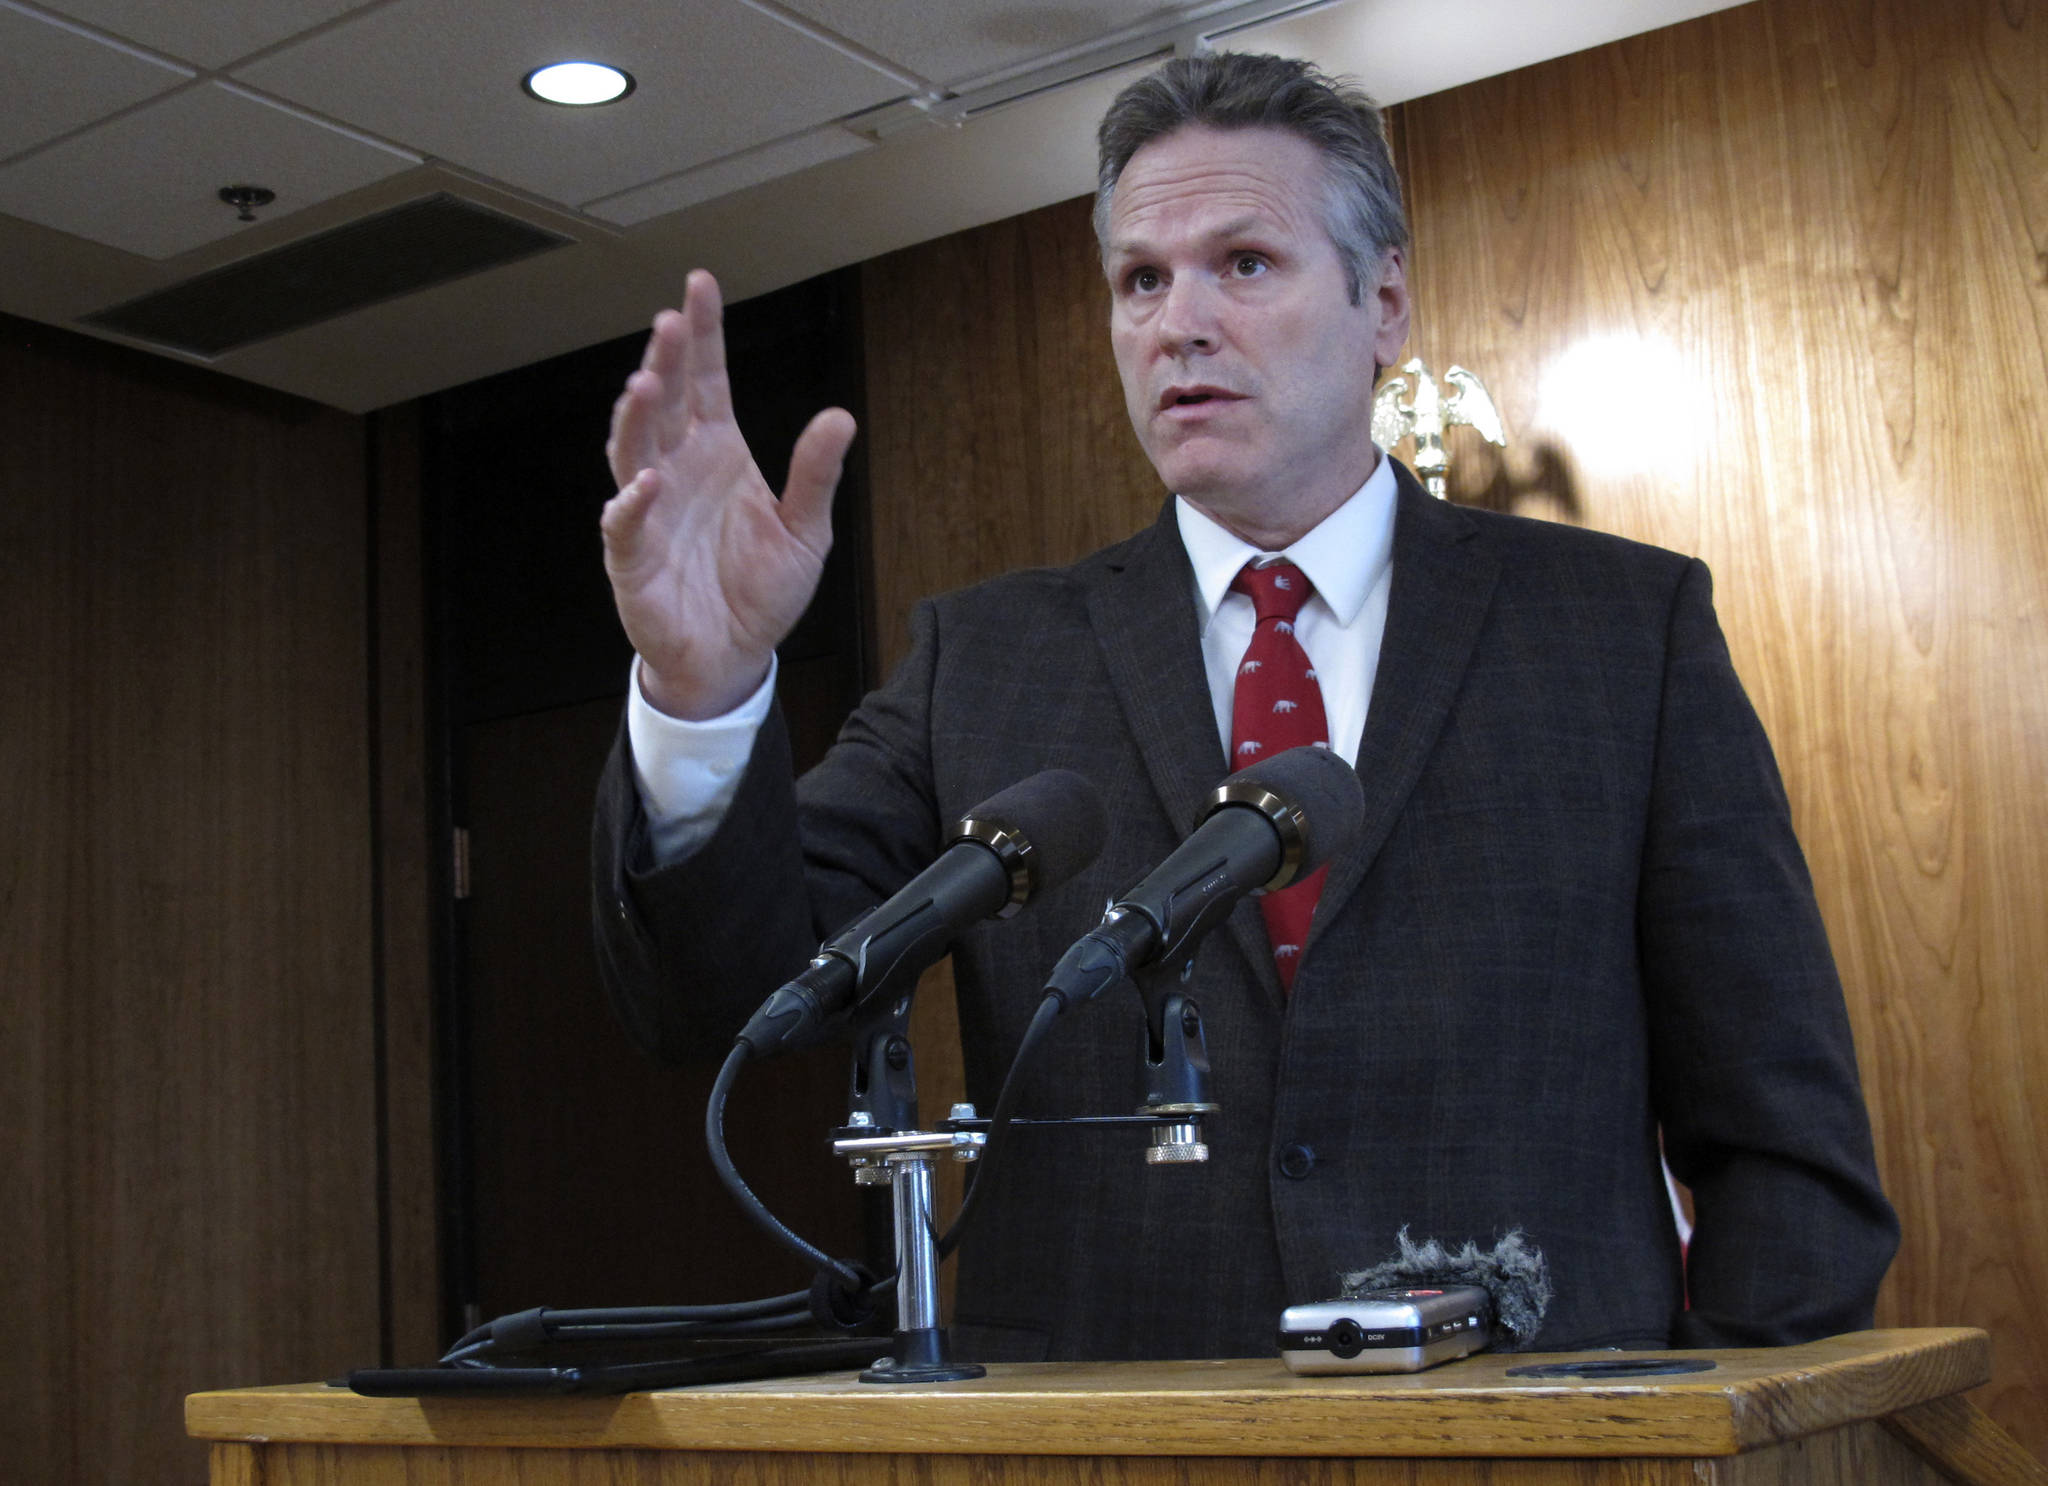 Alaska Gov. Mike Dunleavy speaks to reporters on Wednesday, Feb. 19, 2020, in Juneau, Alaska. Dunleavy has proposed giving Alaskans an additional roughly $1,300 from the state’s oil wealth fund on top of the roughly $1,600 they received last fall that he says in keeping with a formula in state law. The formula has not been followed in recent years amid a budget deficit. (AP Photo/Becky Bohrer)